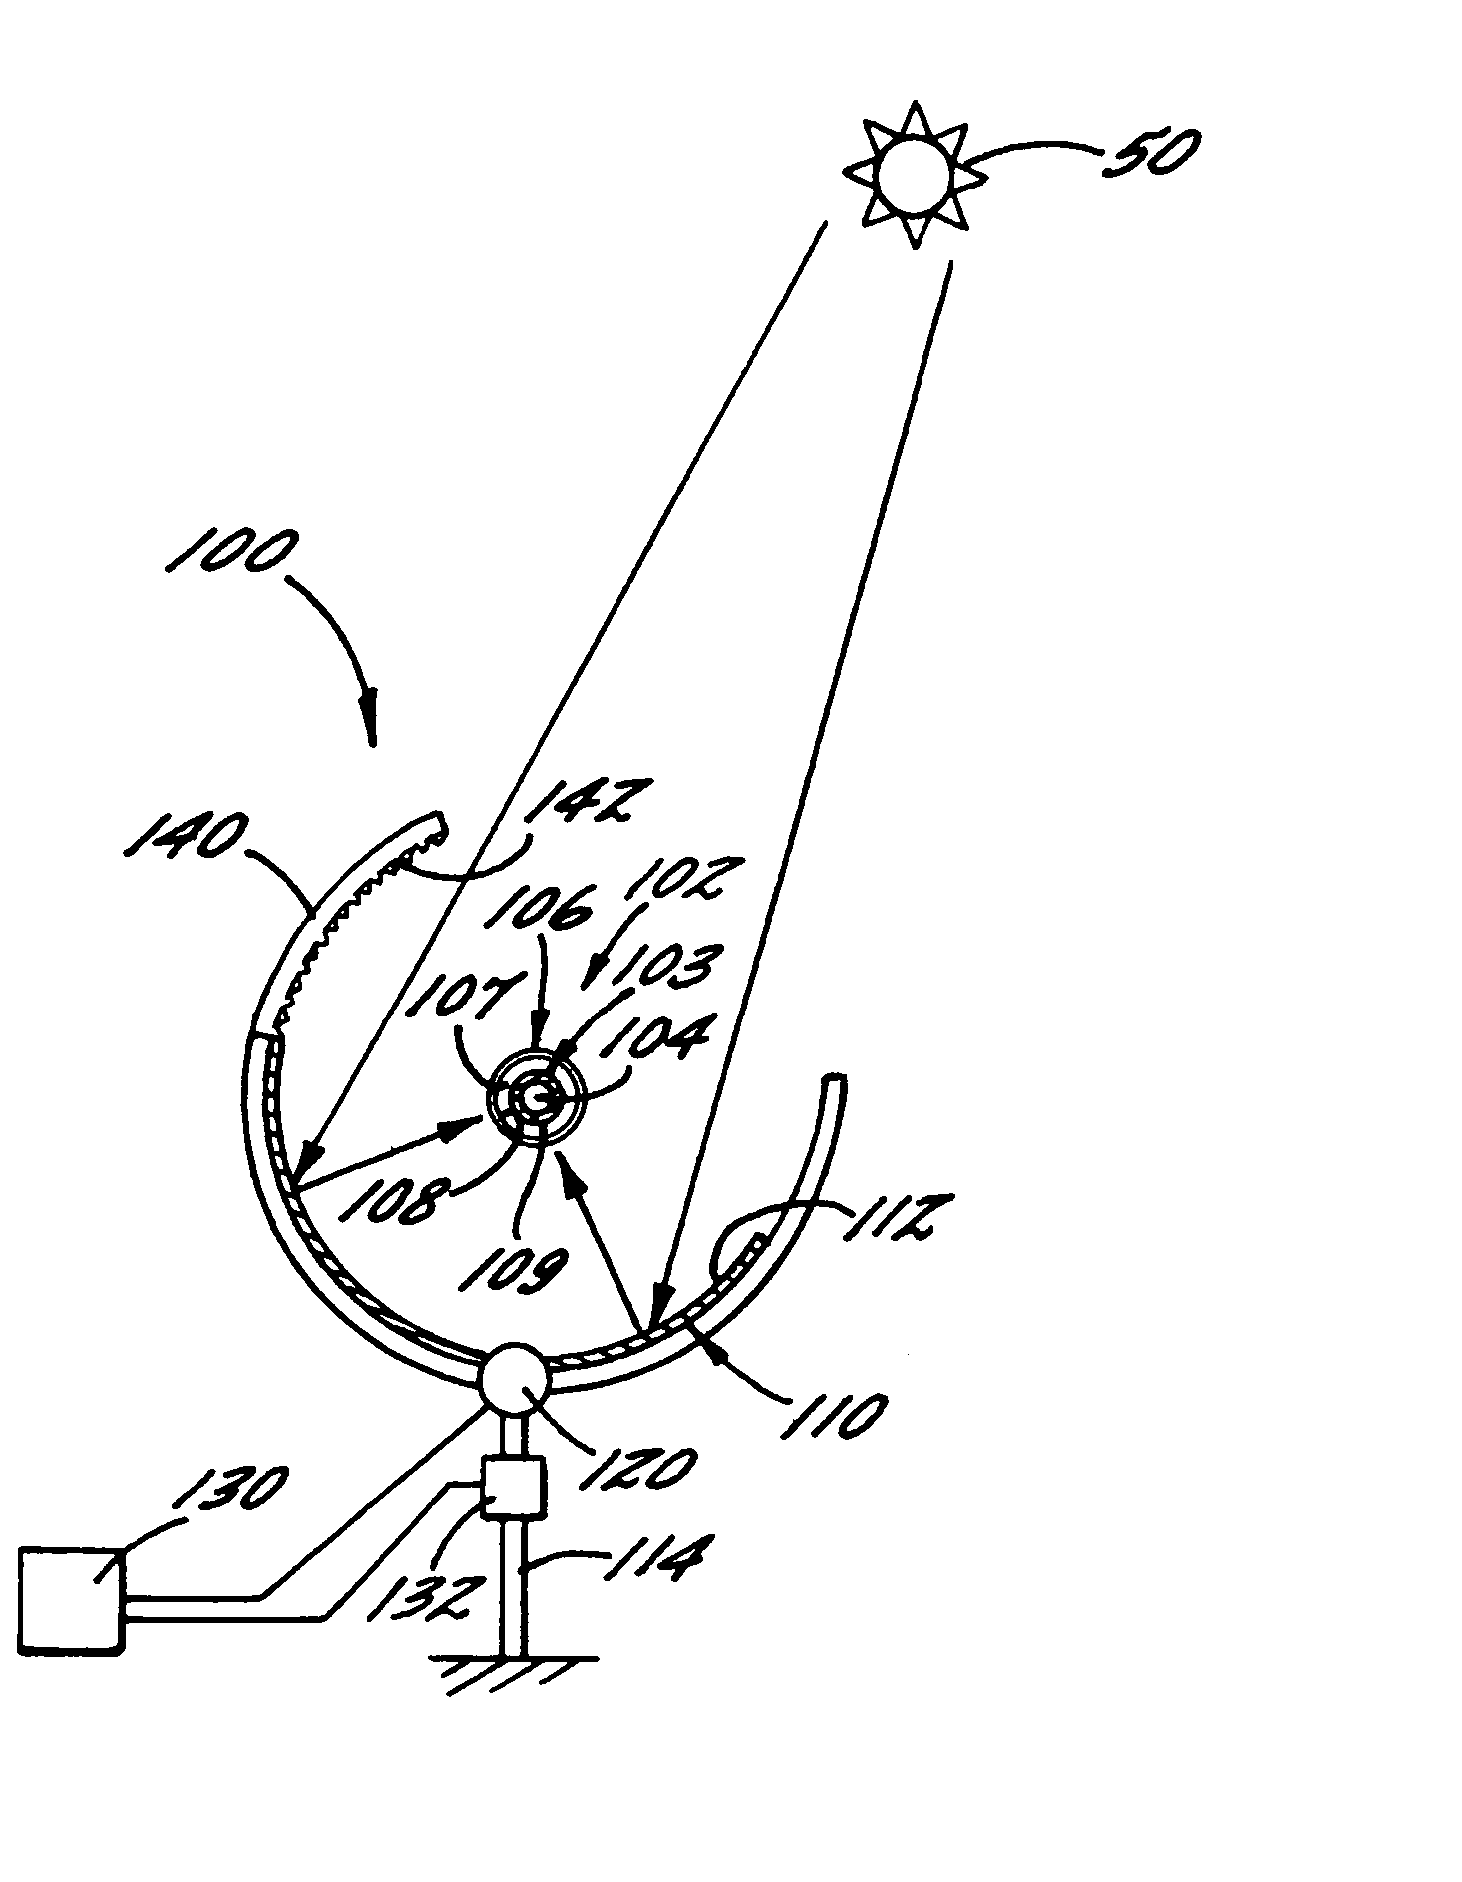 Solar collector and method